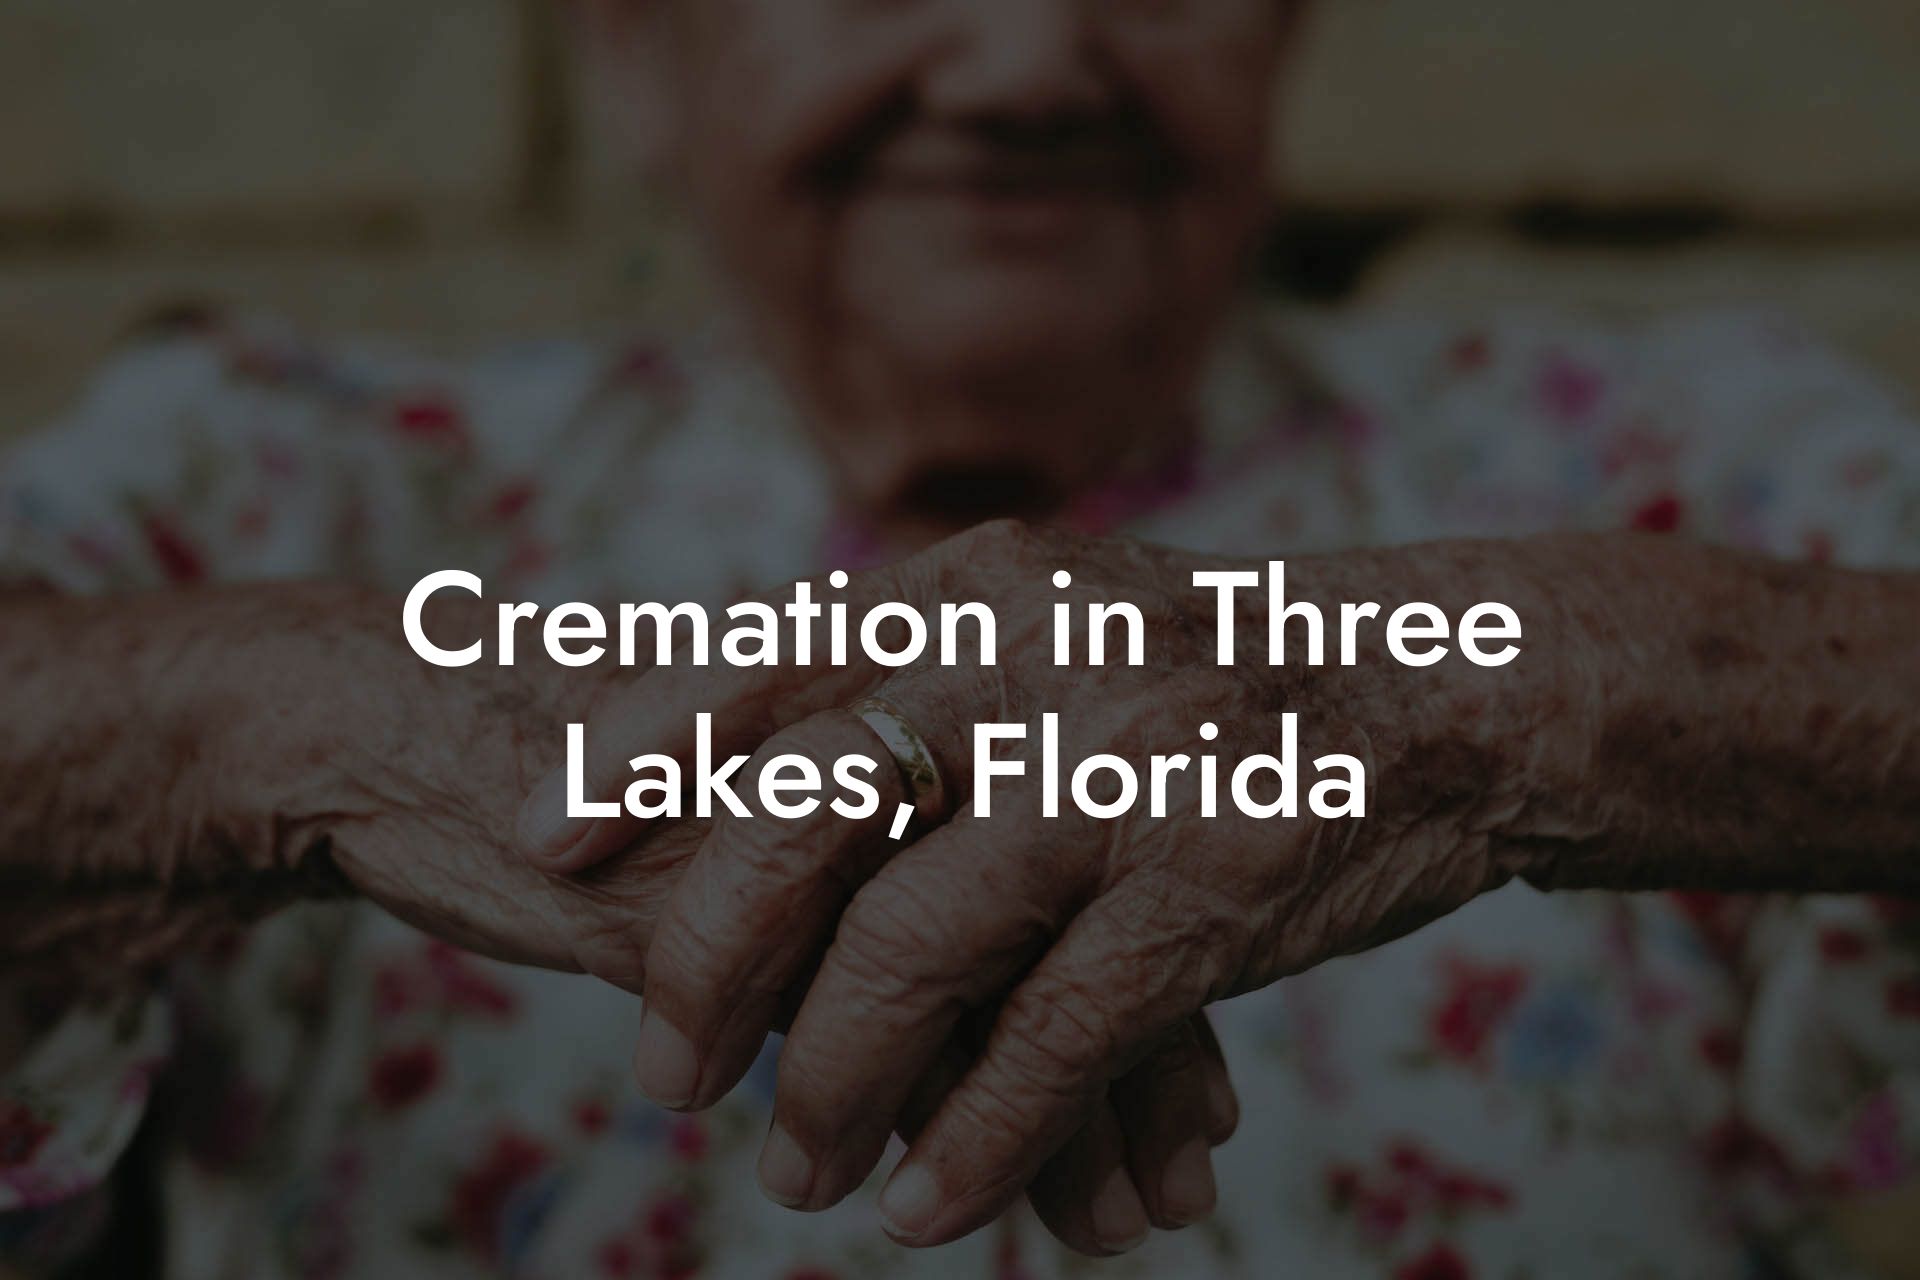 Cremation in Three Lakes, Florida